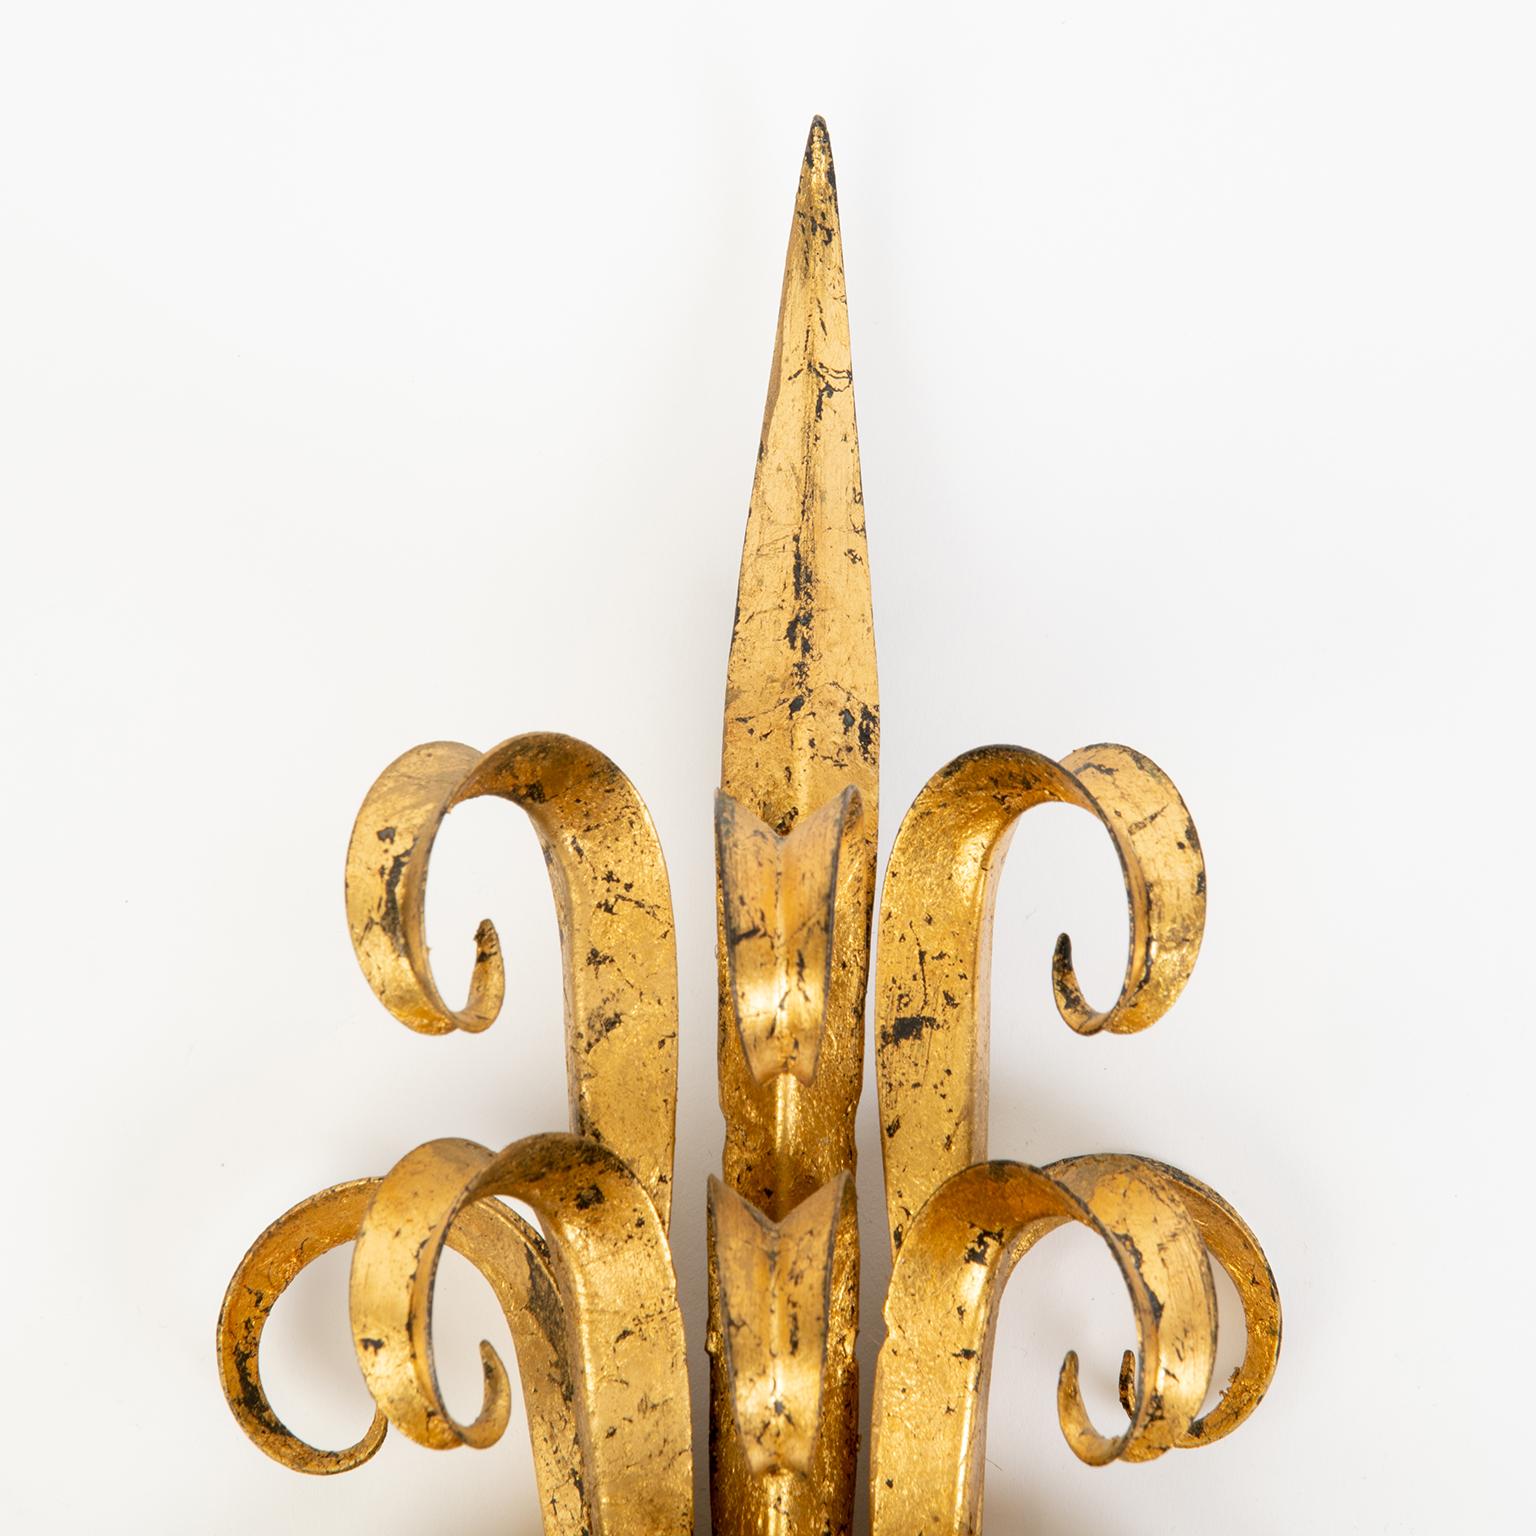 These beautiful scrolled gilt metal sconces are in the Deco style and are made in Florence, Italy in the 1960s.
They are designed for candles but may be electrified.